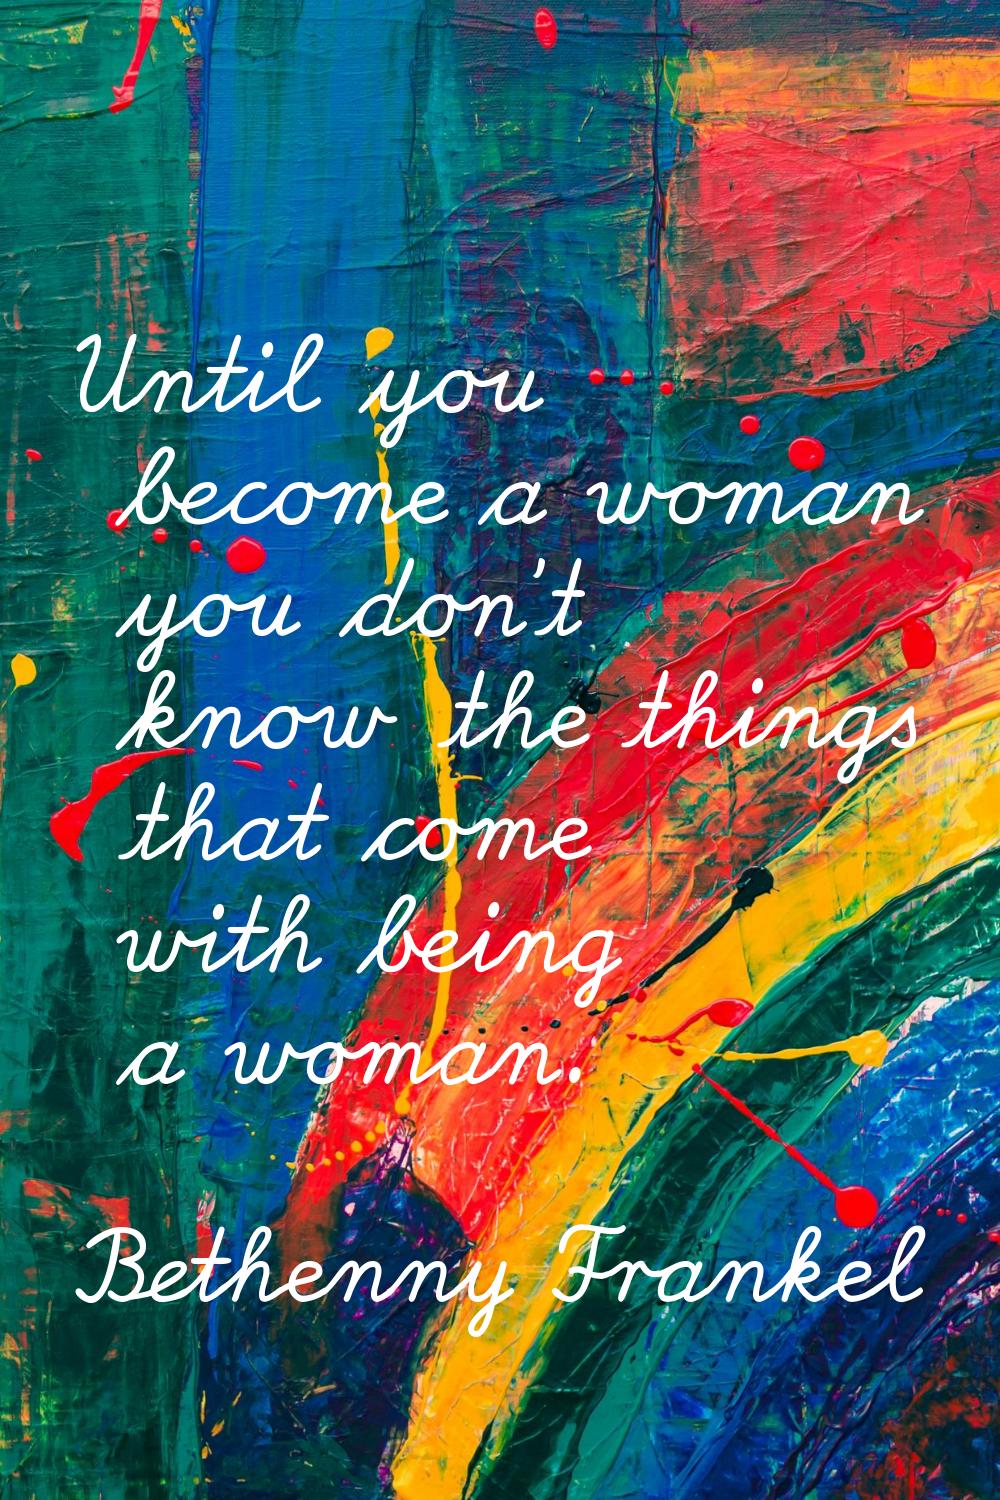 Until you become a woman you don't know the things that come with being a woman.